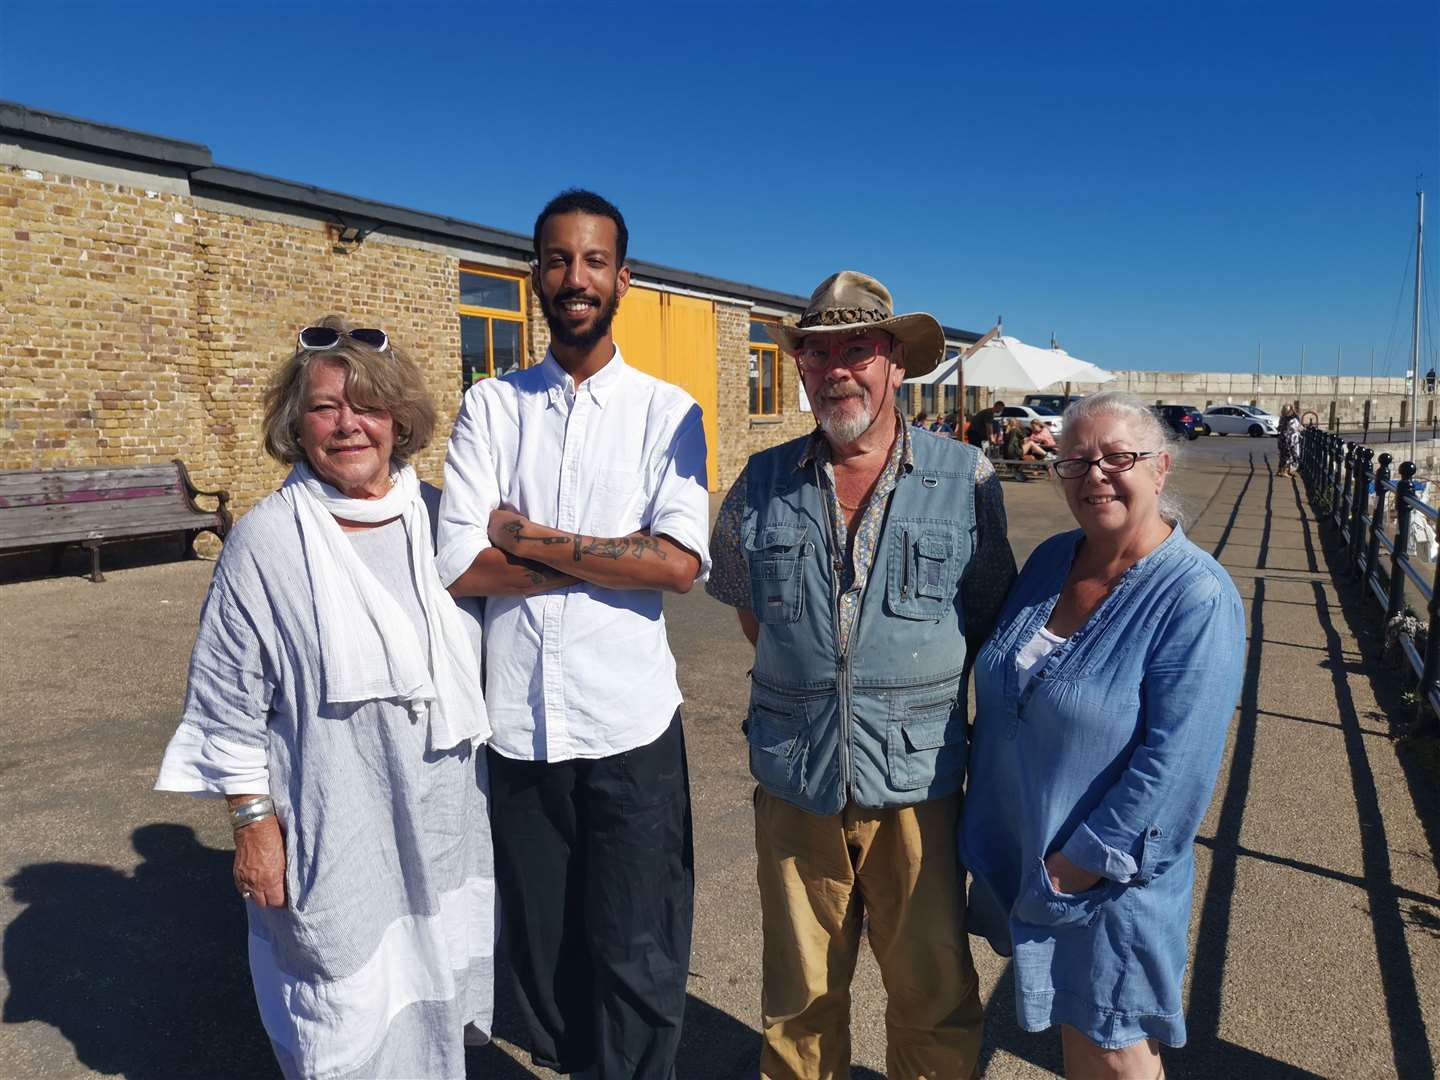 Kate Borg of Michael Richardson Fine Art, Marcelo Rodrigues head chef at Sargasso, artist Michael Richardson and Carole Lane, owner of Harbour Arms micropub